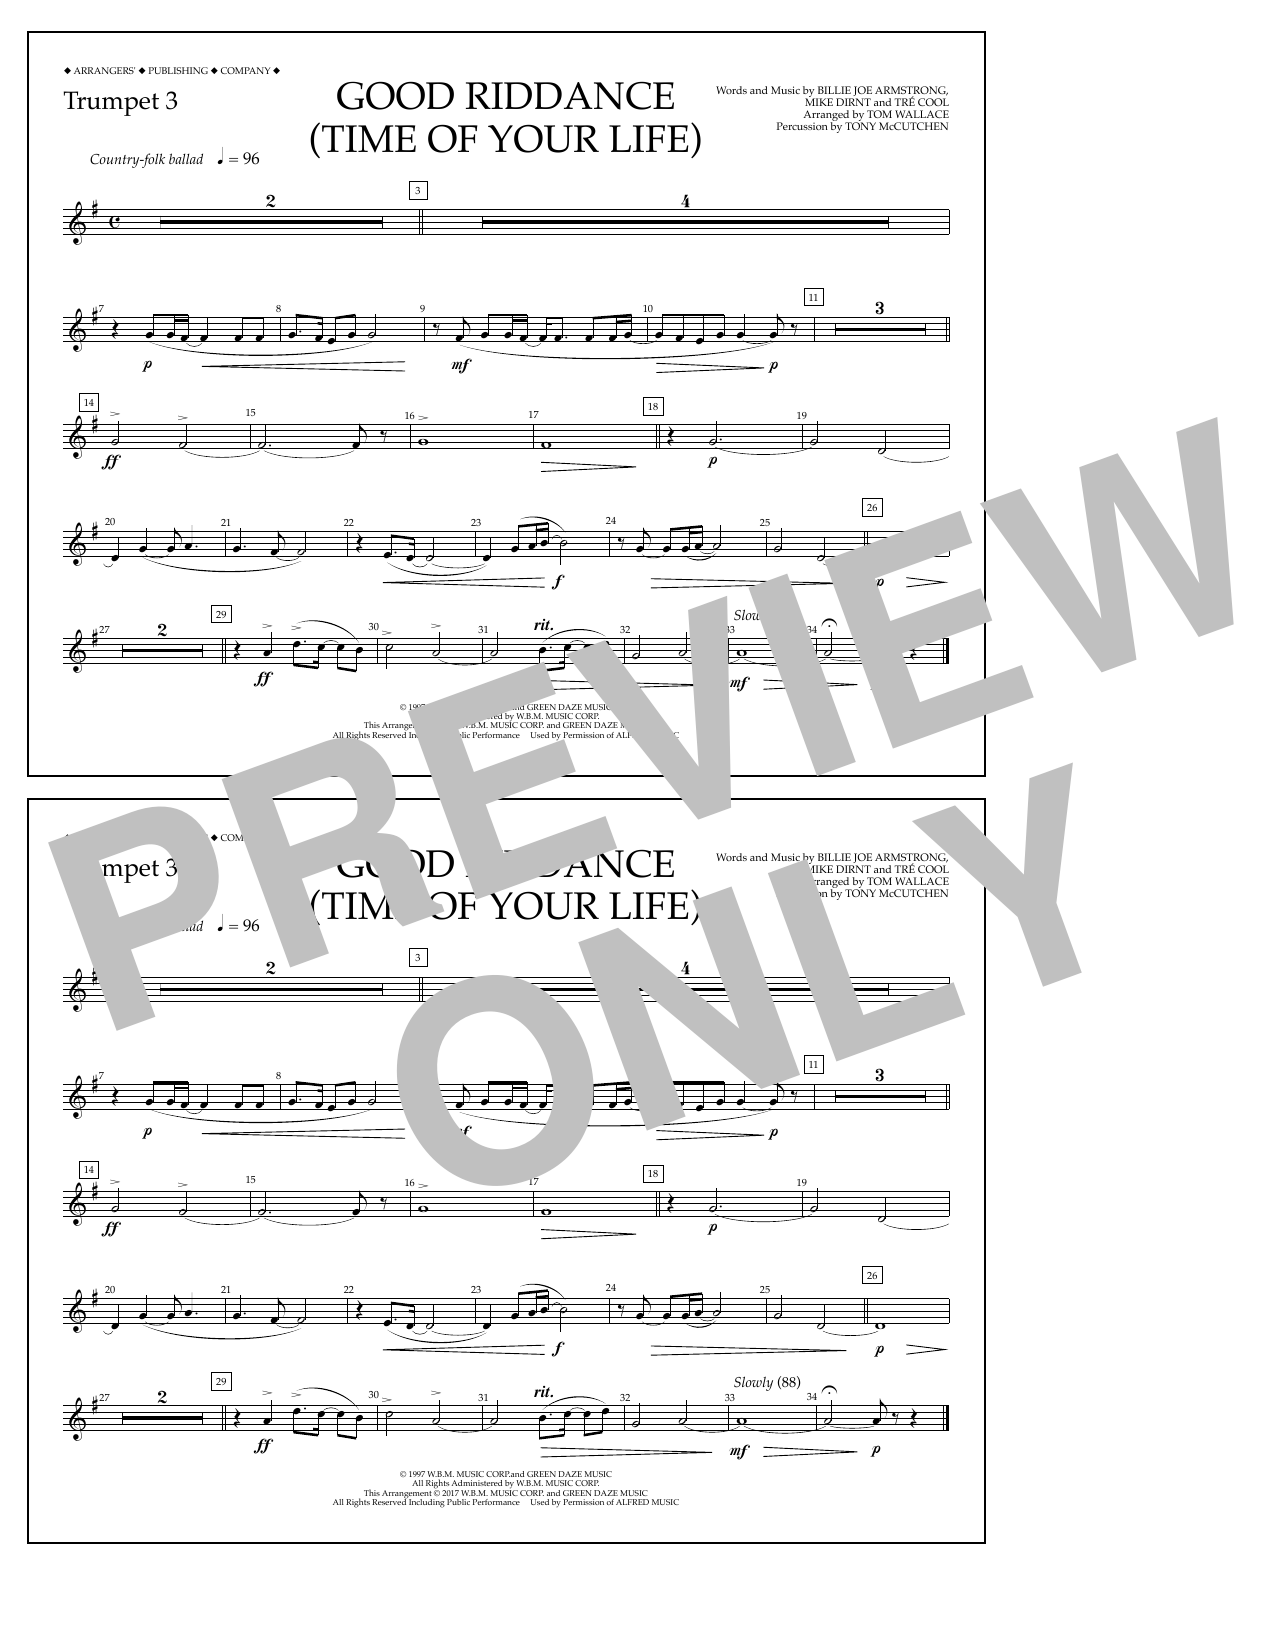 Download Tom Wallace Good Riddance (Time of Your Life) - Tru Sheet Music